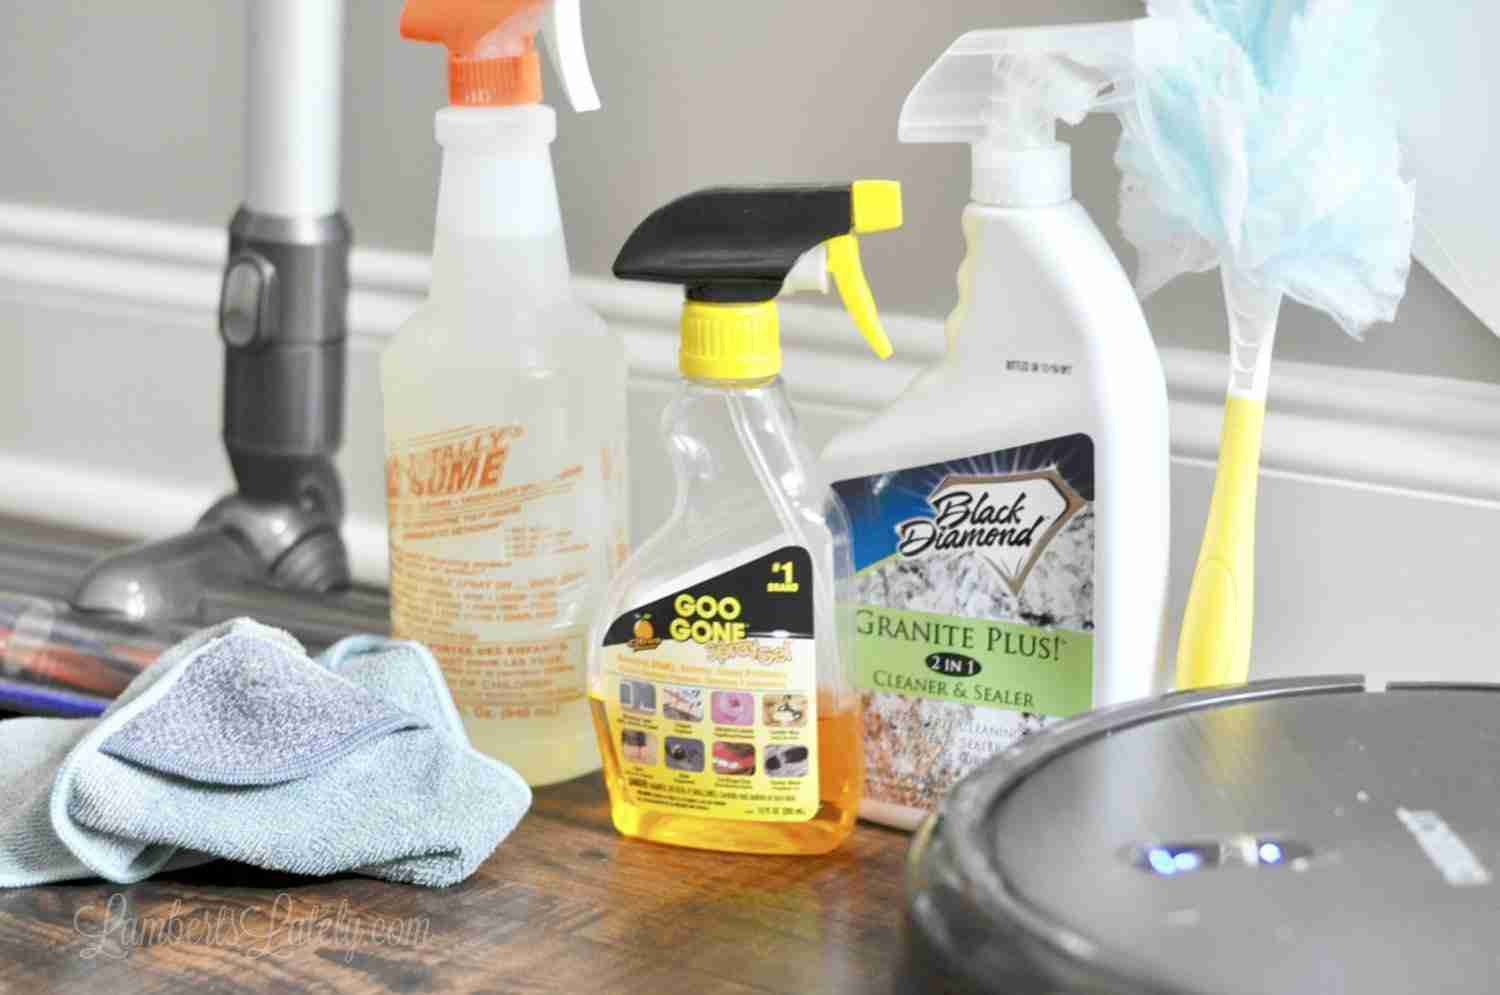 collection of household cleaning supplies on a wood floor.